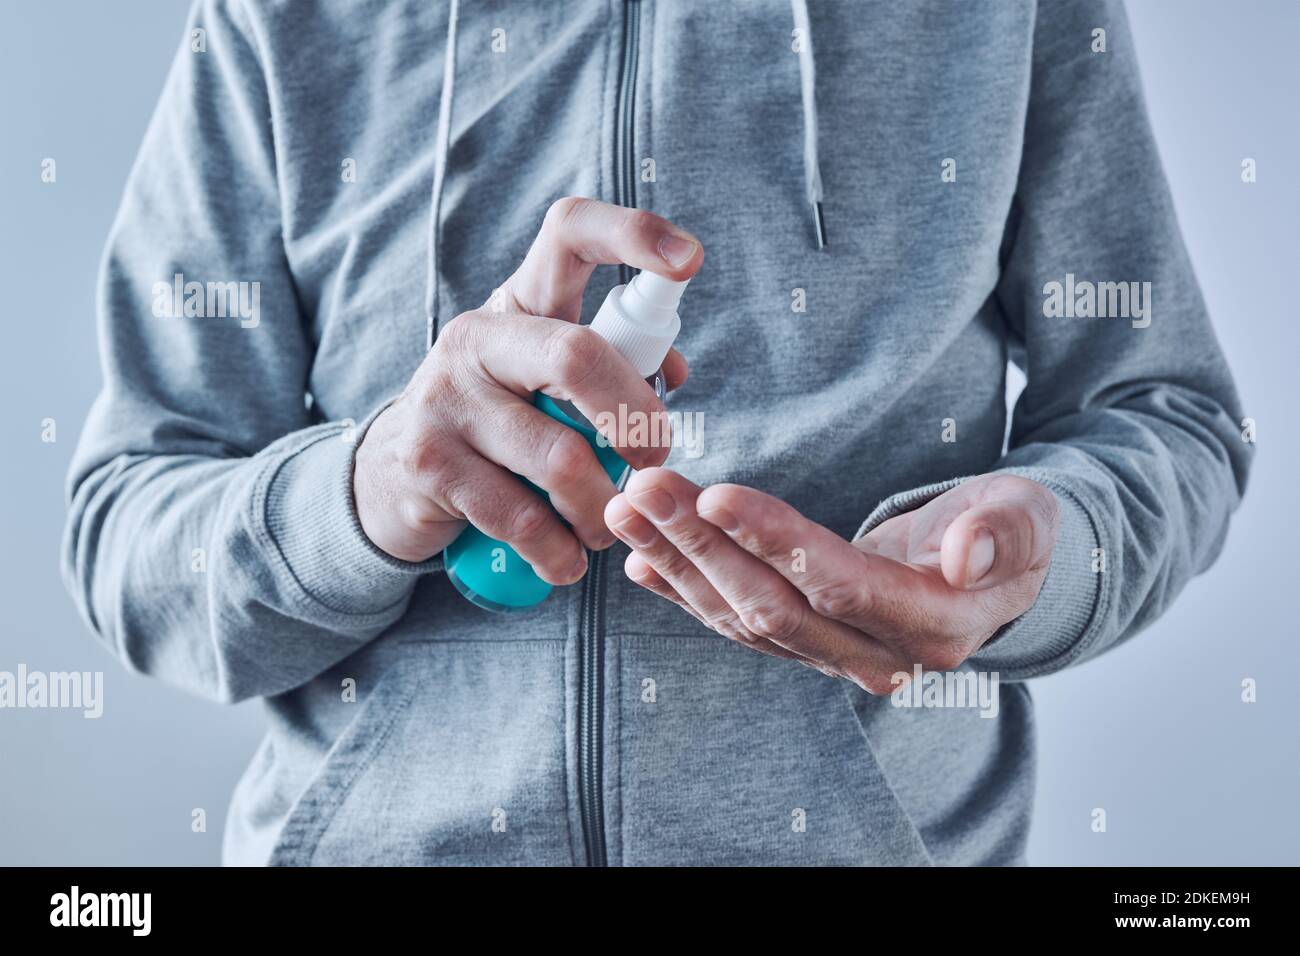 Hands disinfecting with sanitizer spray, close up with selective focus Stock Photo